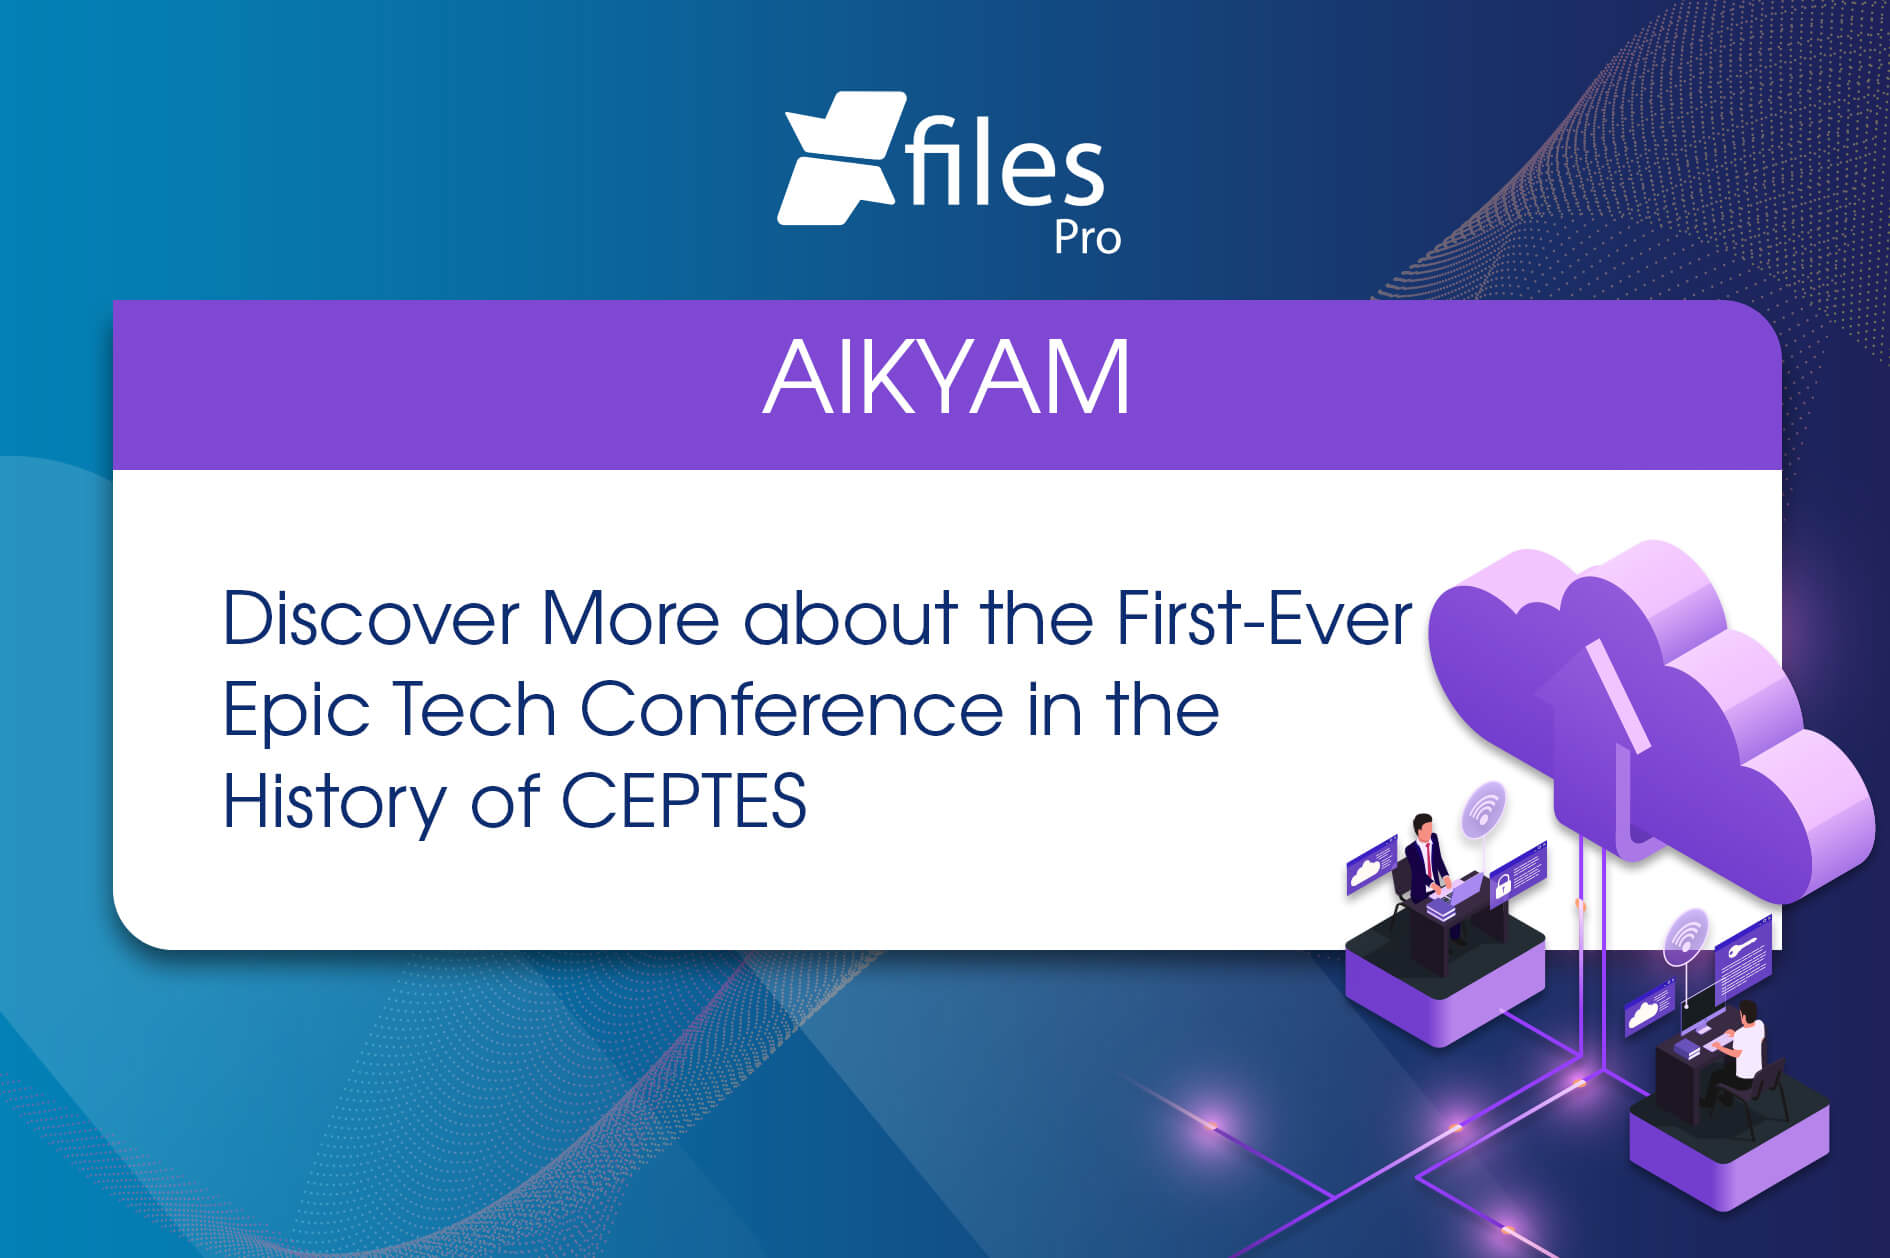 AIKYAM | Discover More about the First-Ever Epic Tech Conference in the History of CEPTES